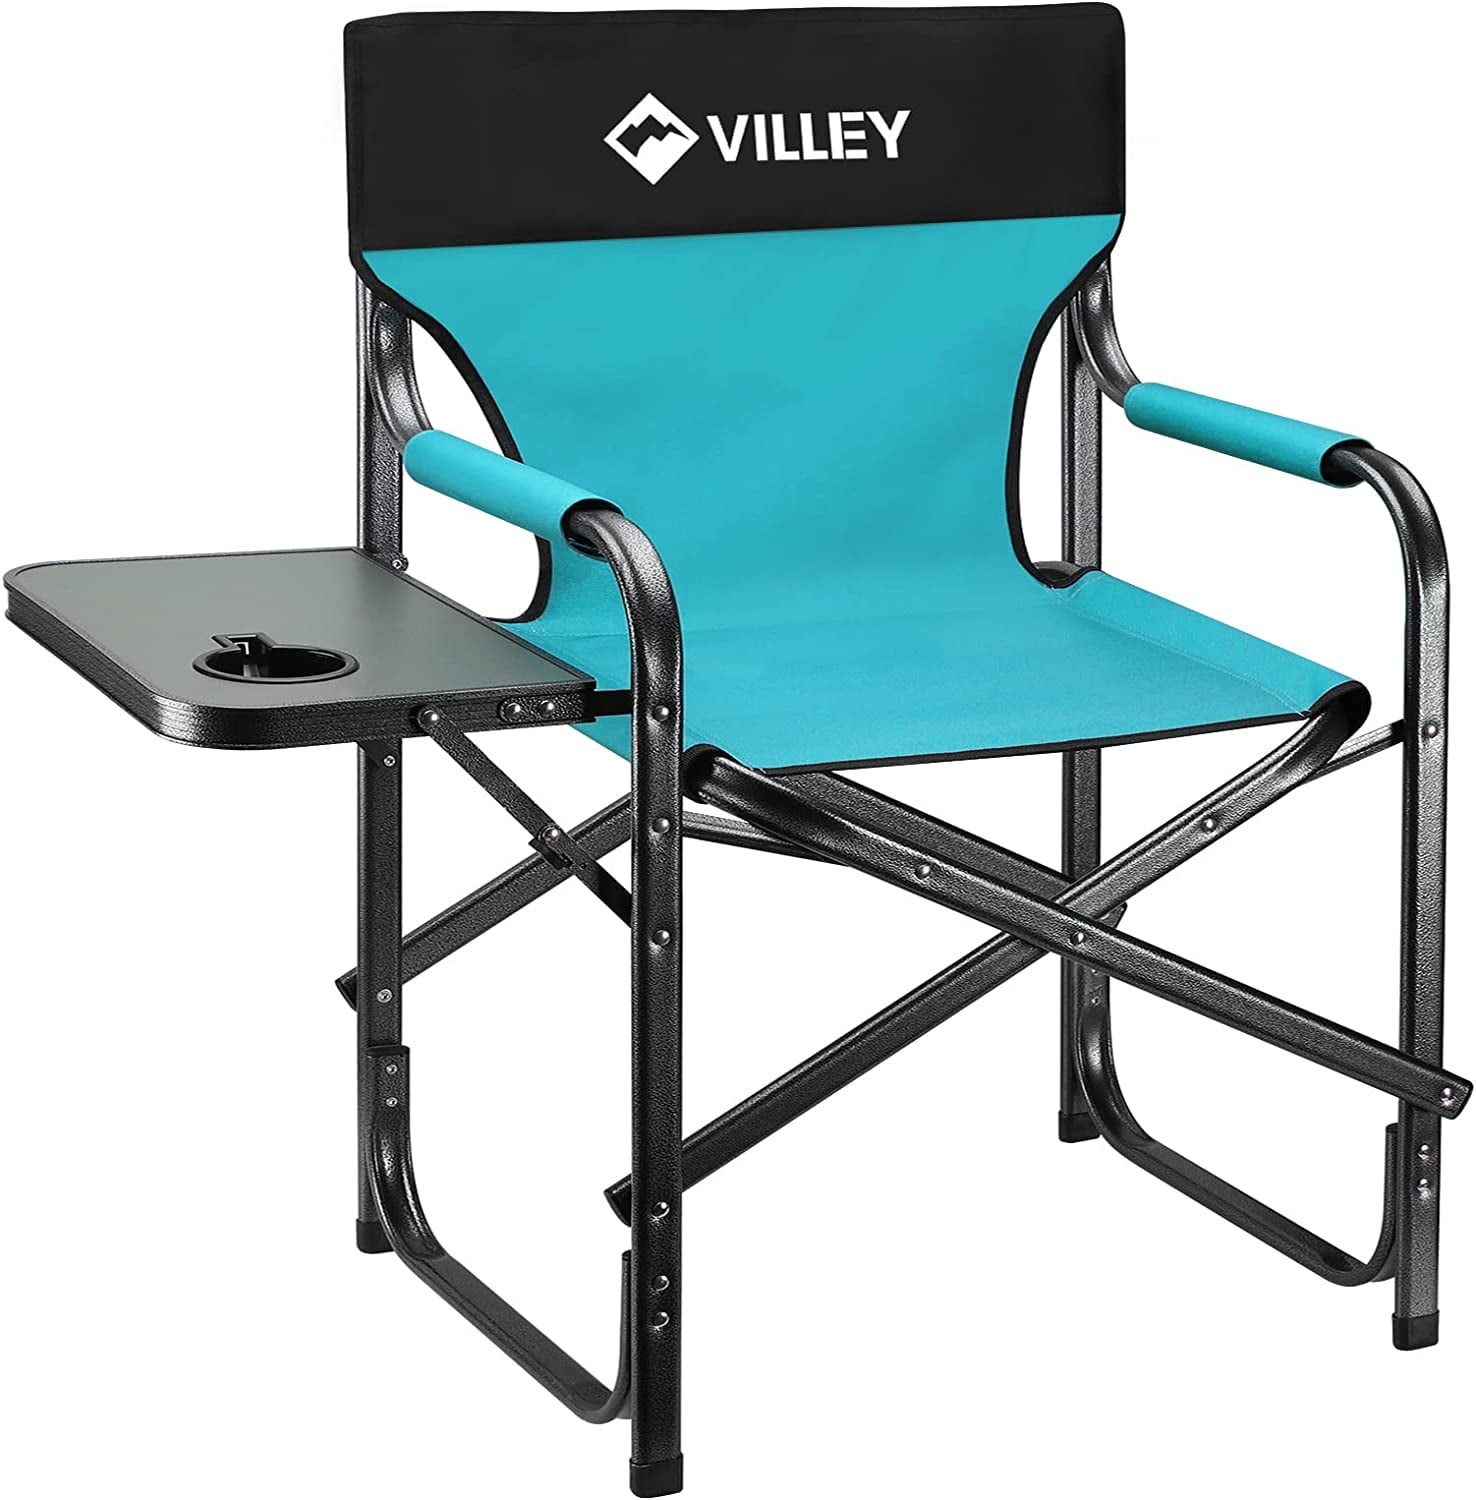 VILLEY Heavy Duty Directors Chair, Folding Camping Chairs, Portable  Foldable Chair, for Camp Tailgating Lawn Picnic Fishing Beach, Supports 350  lbs